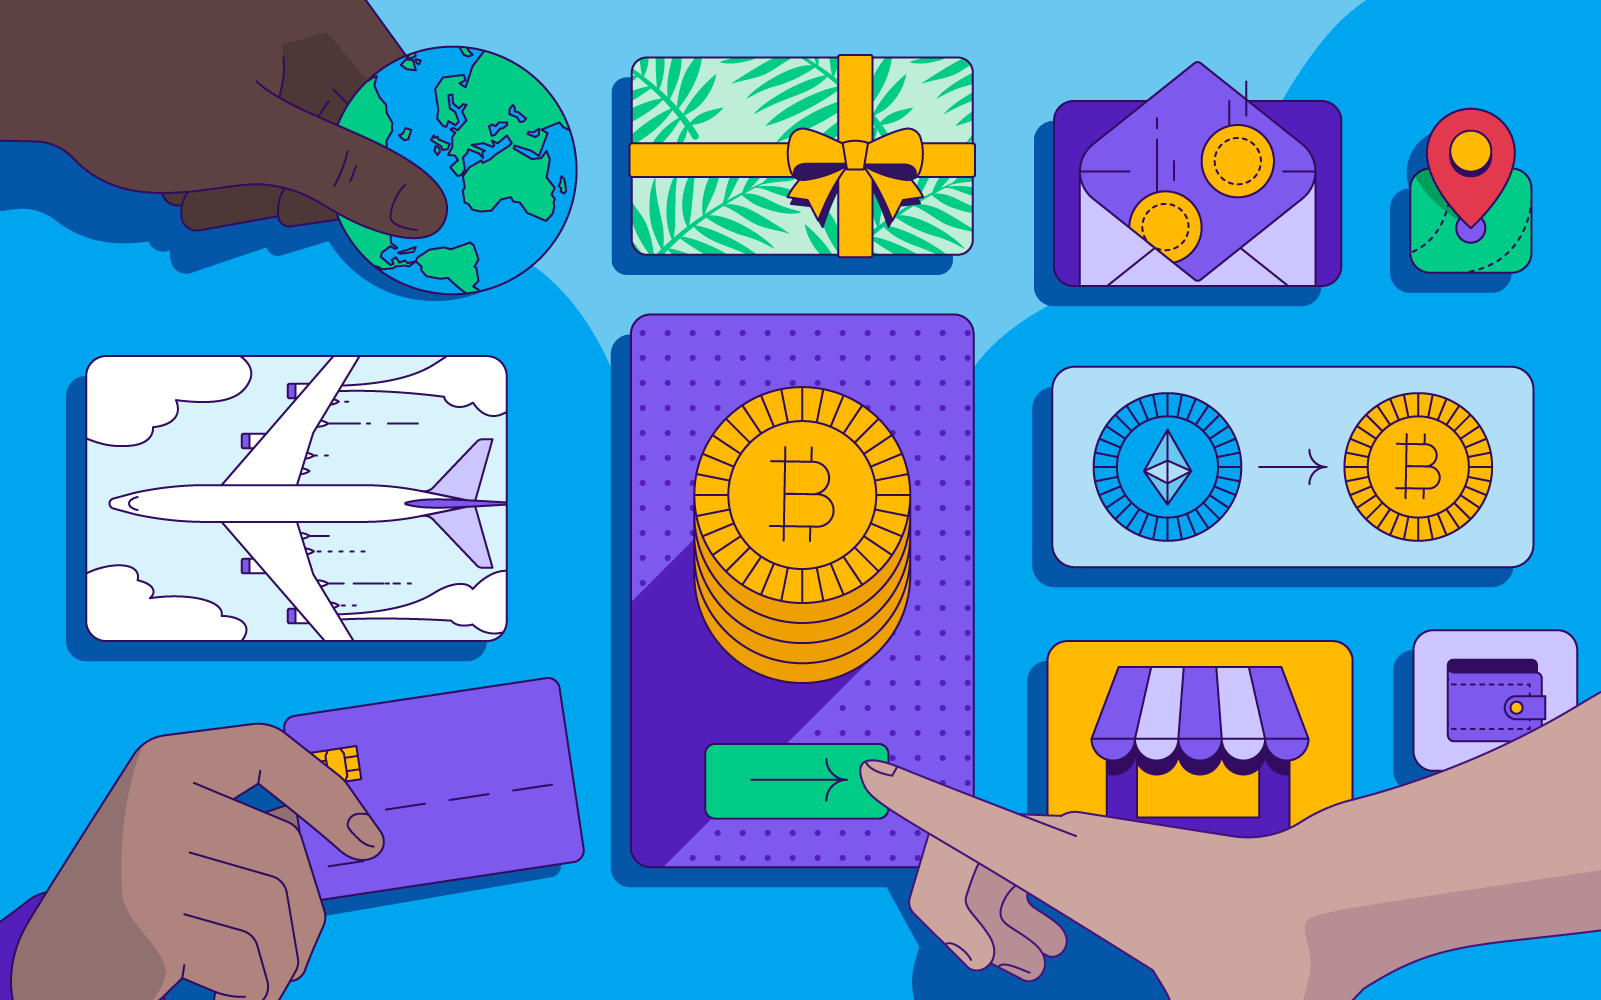 How to use Bitcoin in different ways